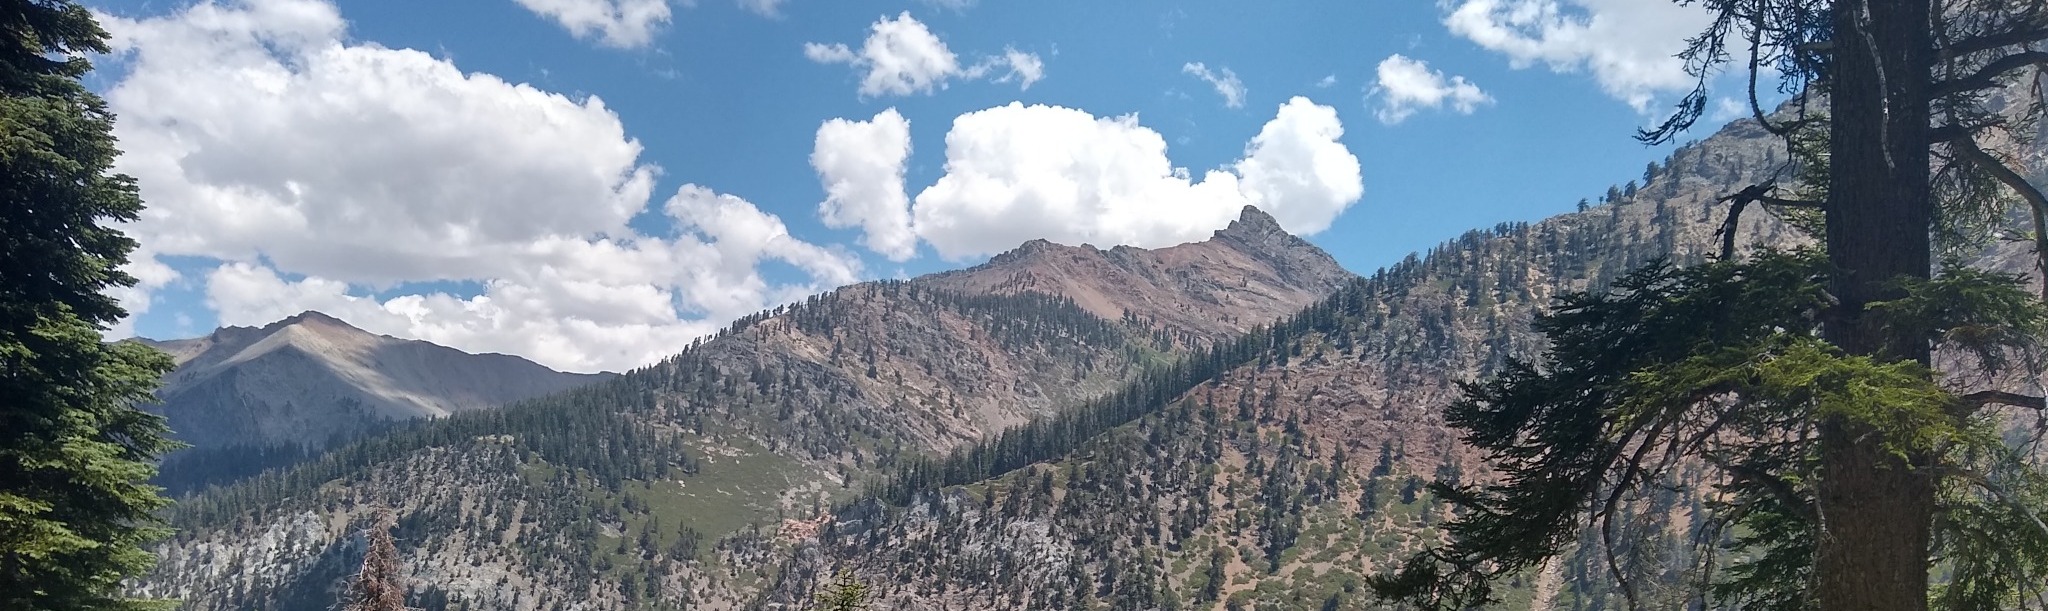 View of Mineral King Valley at 8000+ feet